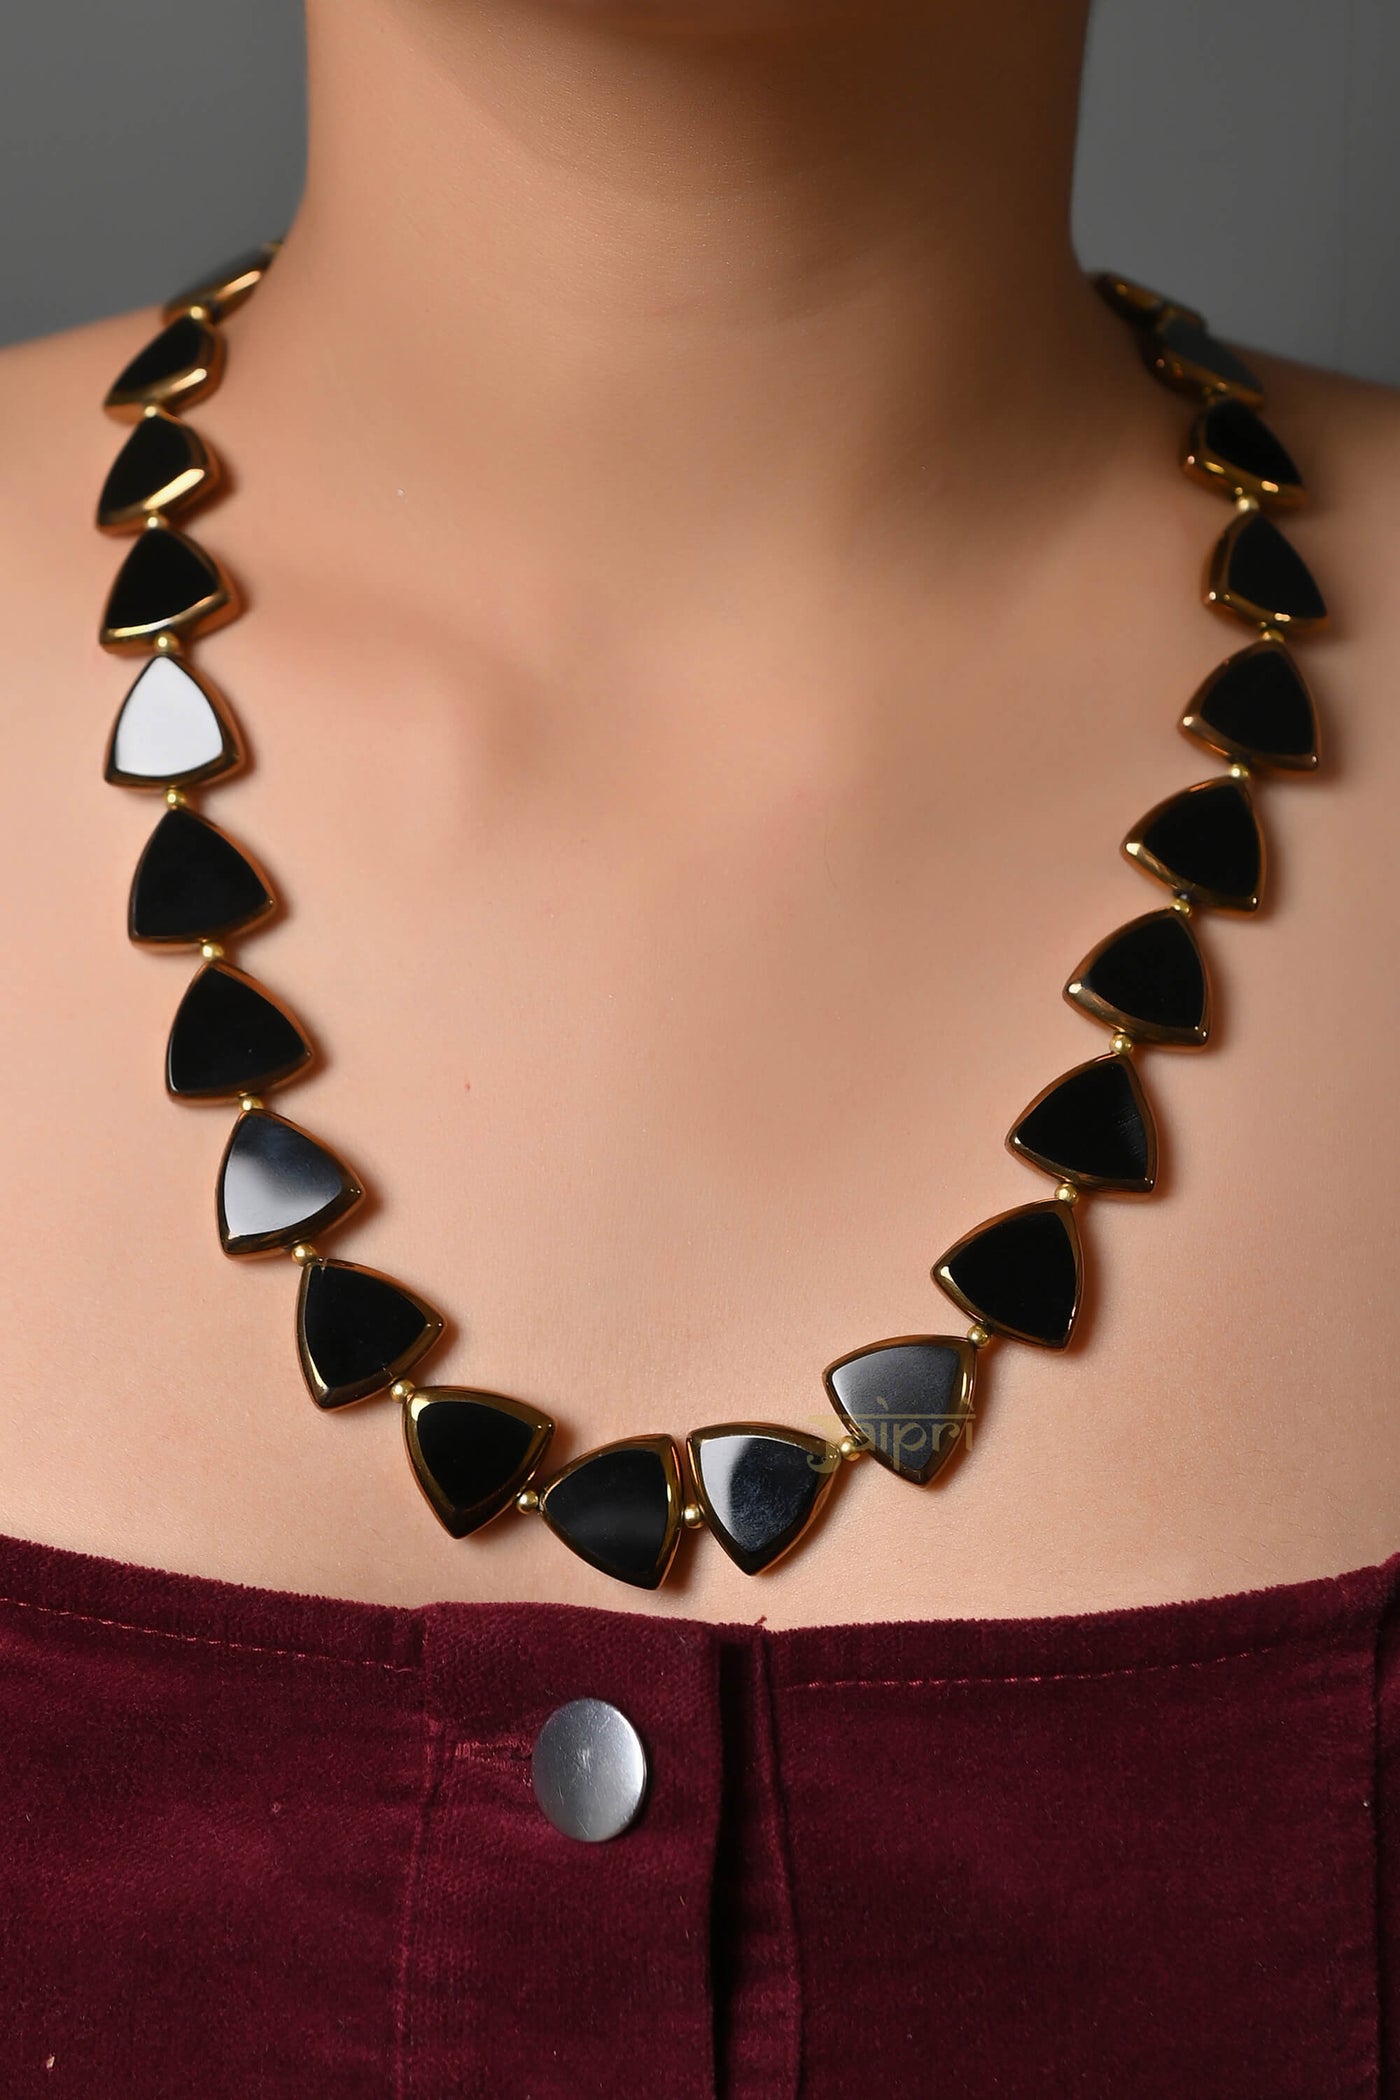 Black Color Triangle Shape Necklace With Earrings